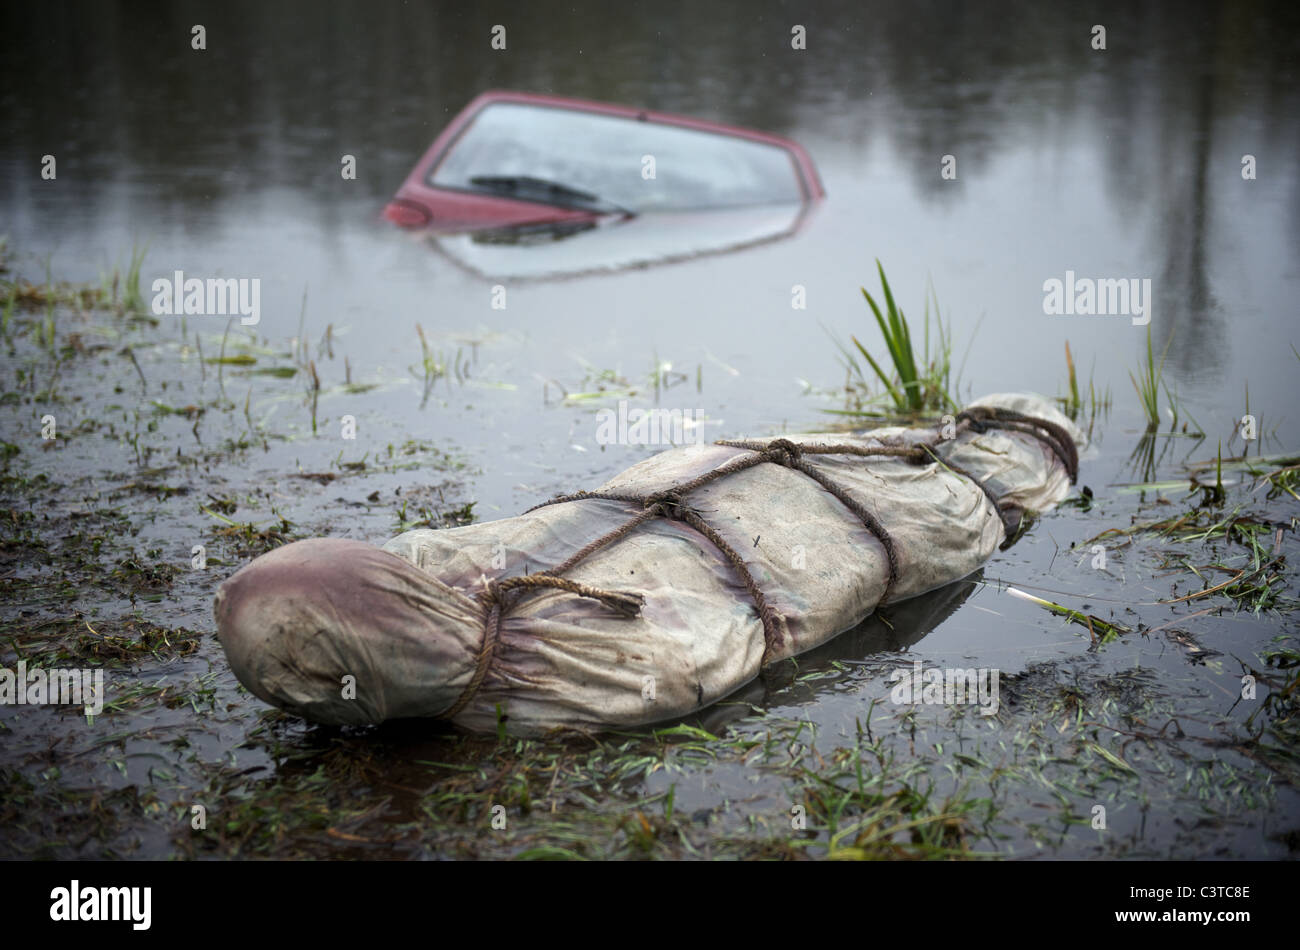 A car half-sunken in a lake with a body bag in the foreground Stock Photo